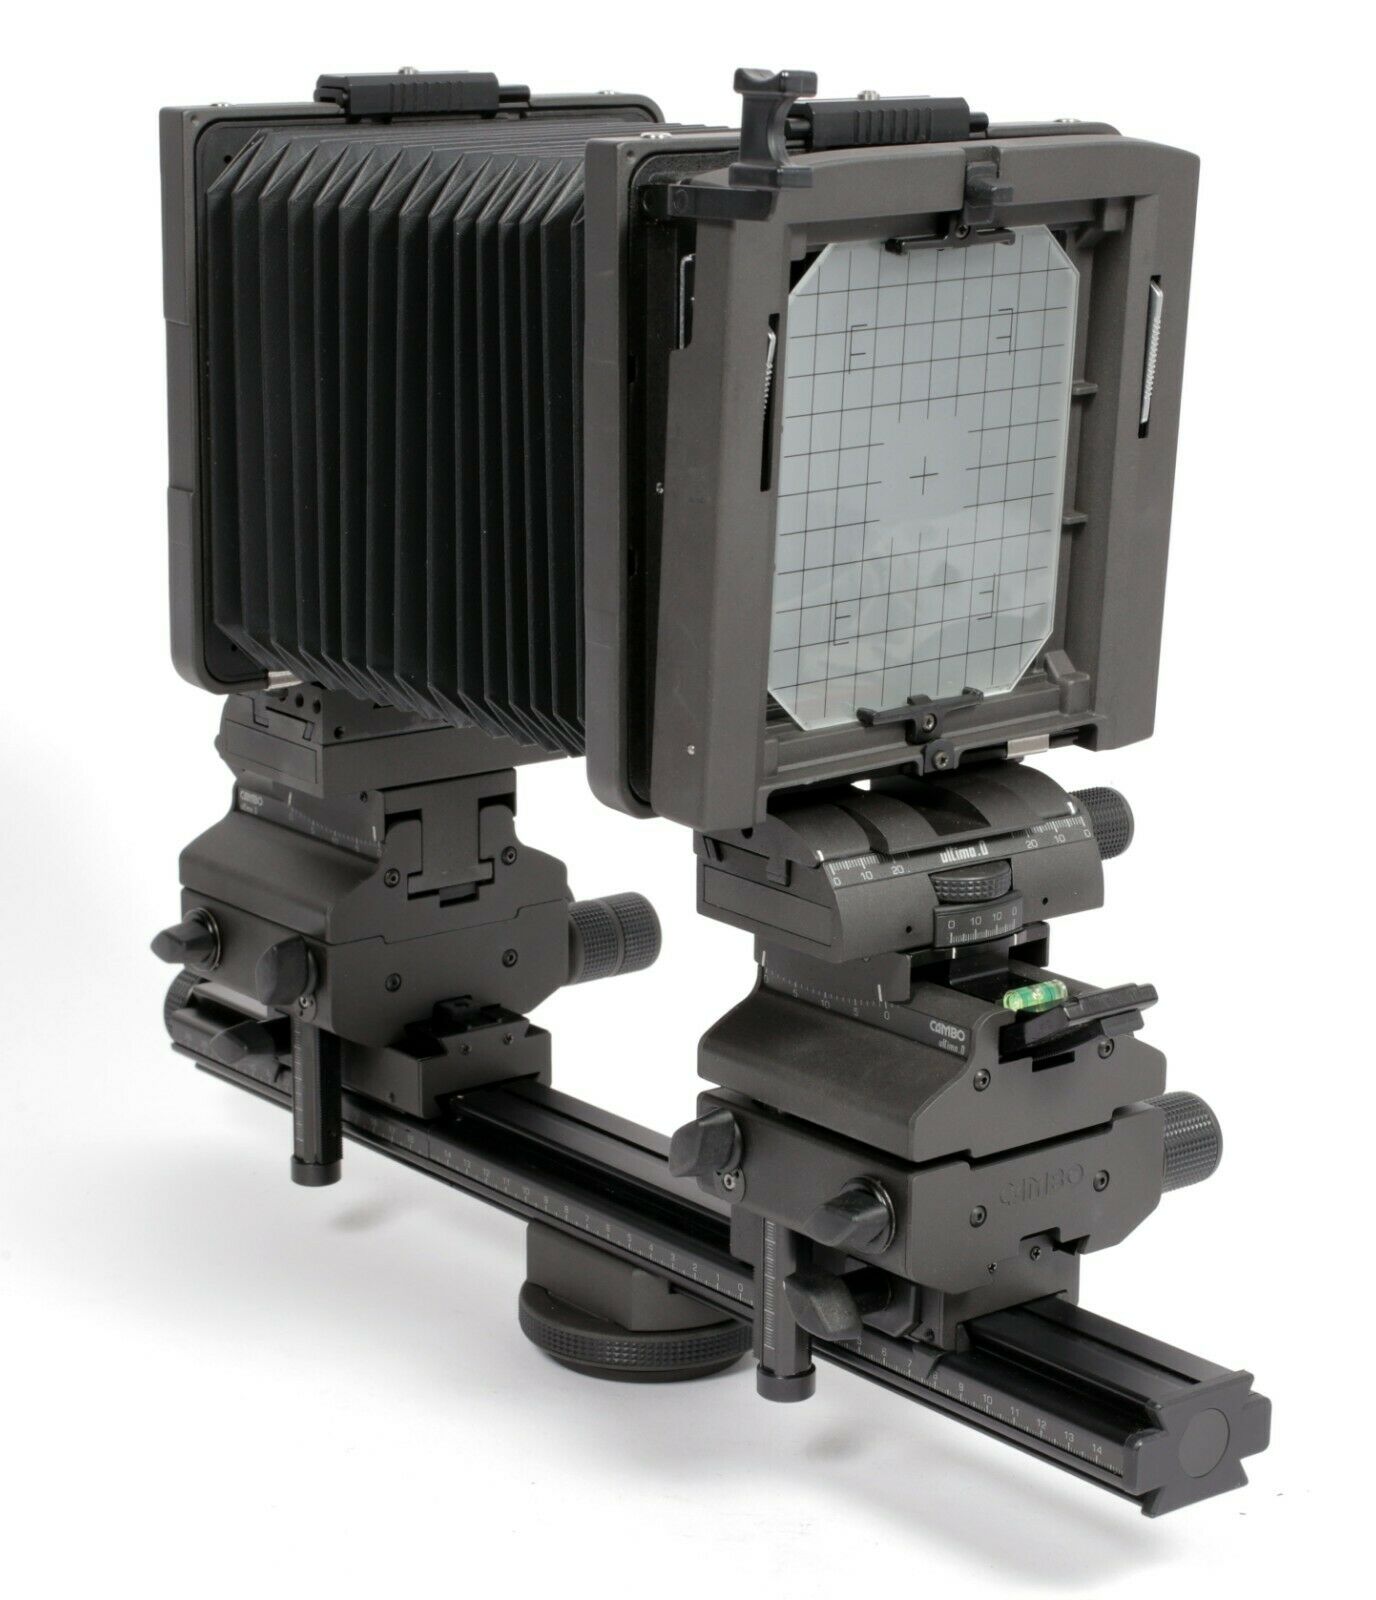 Cambo Ultima D 4X5 camera with upgraded back and extension rail